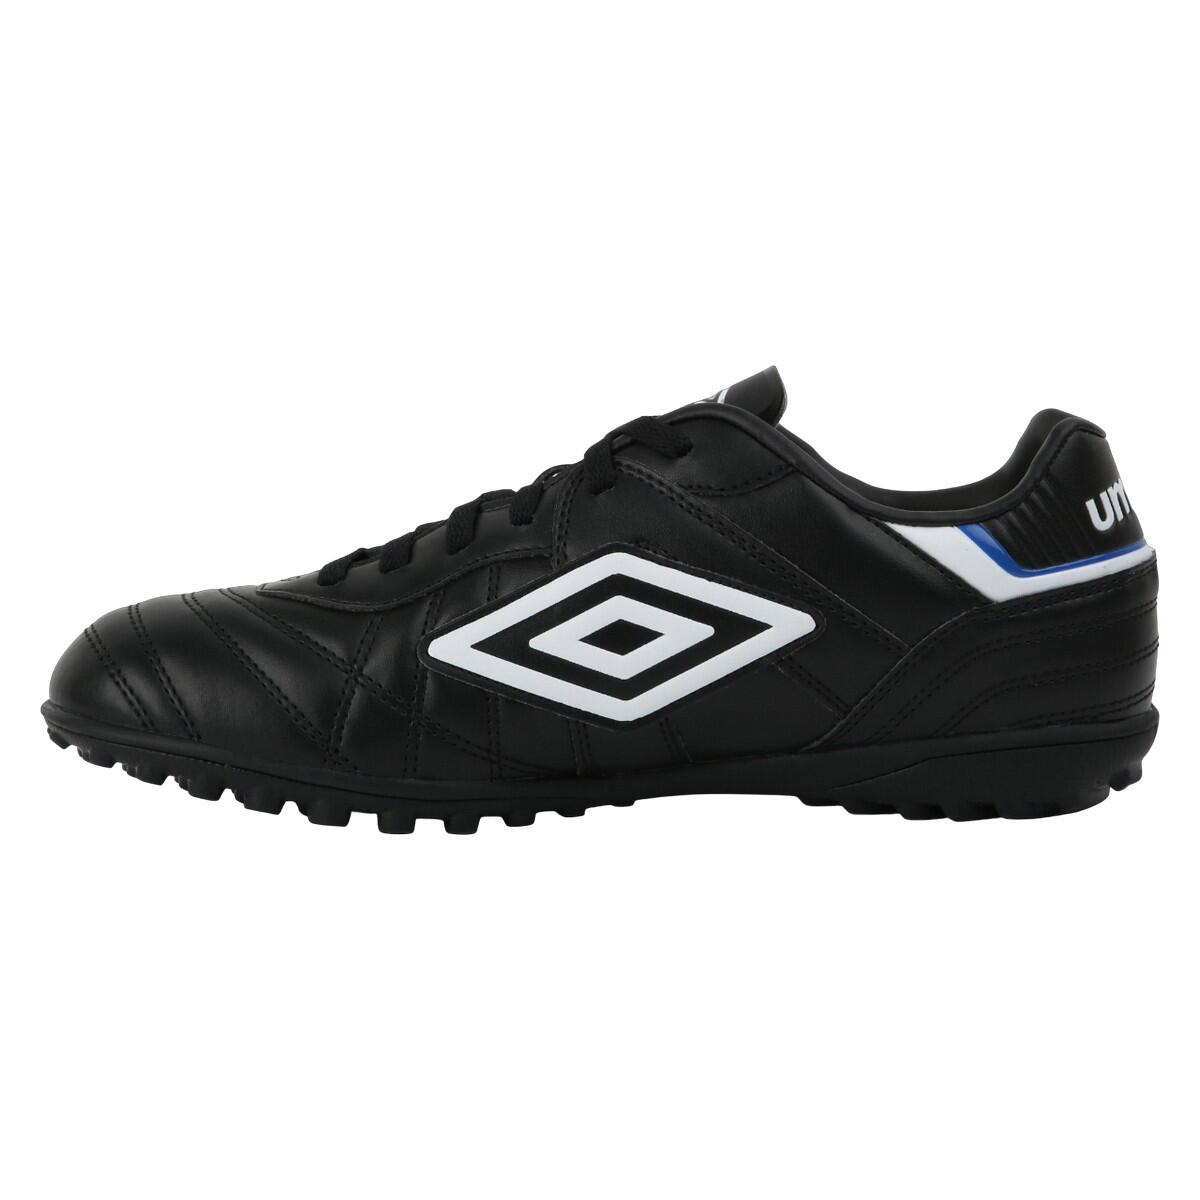 Mens Speciali Eternal Club Tf Leather Football Boots (Black/White/Royal Blue) 3/4